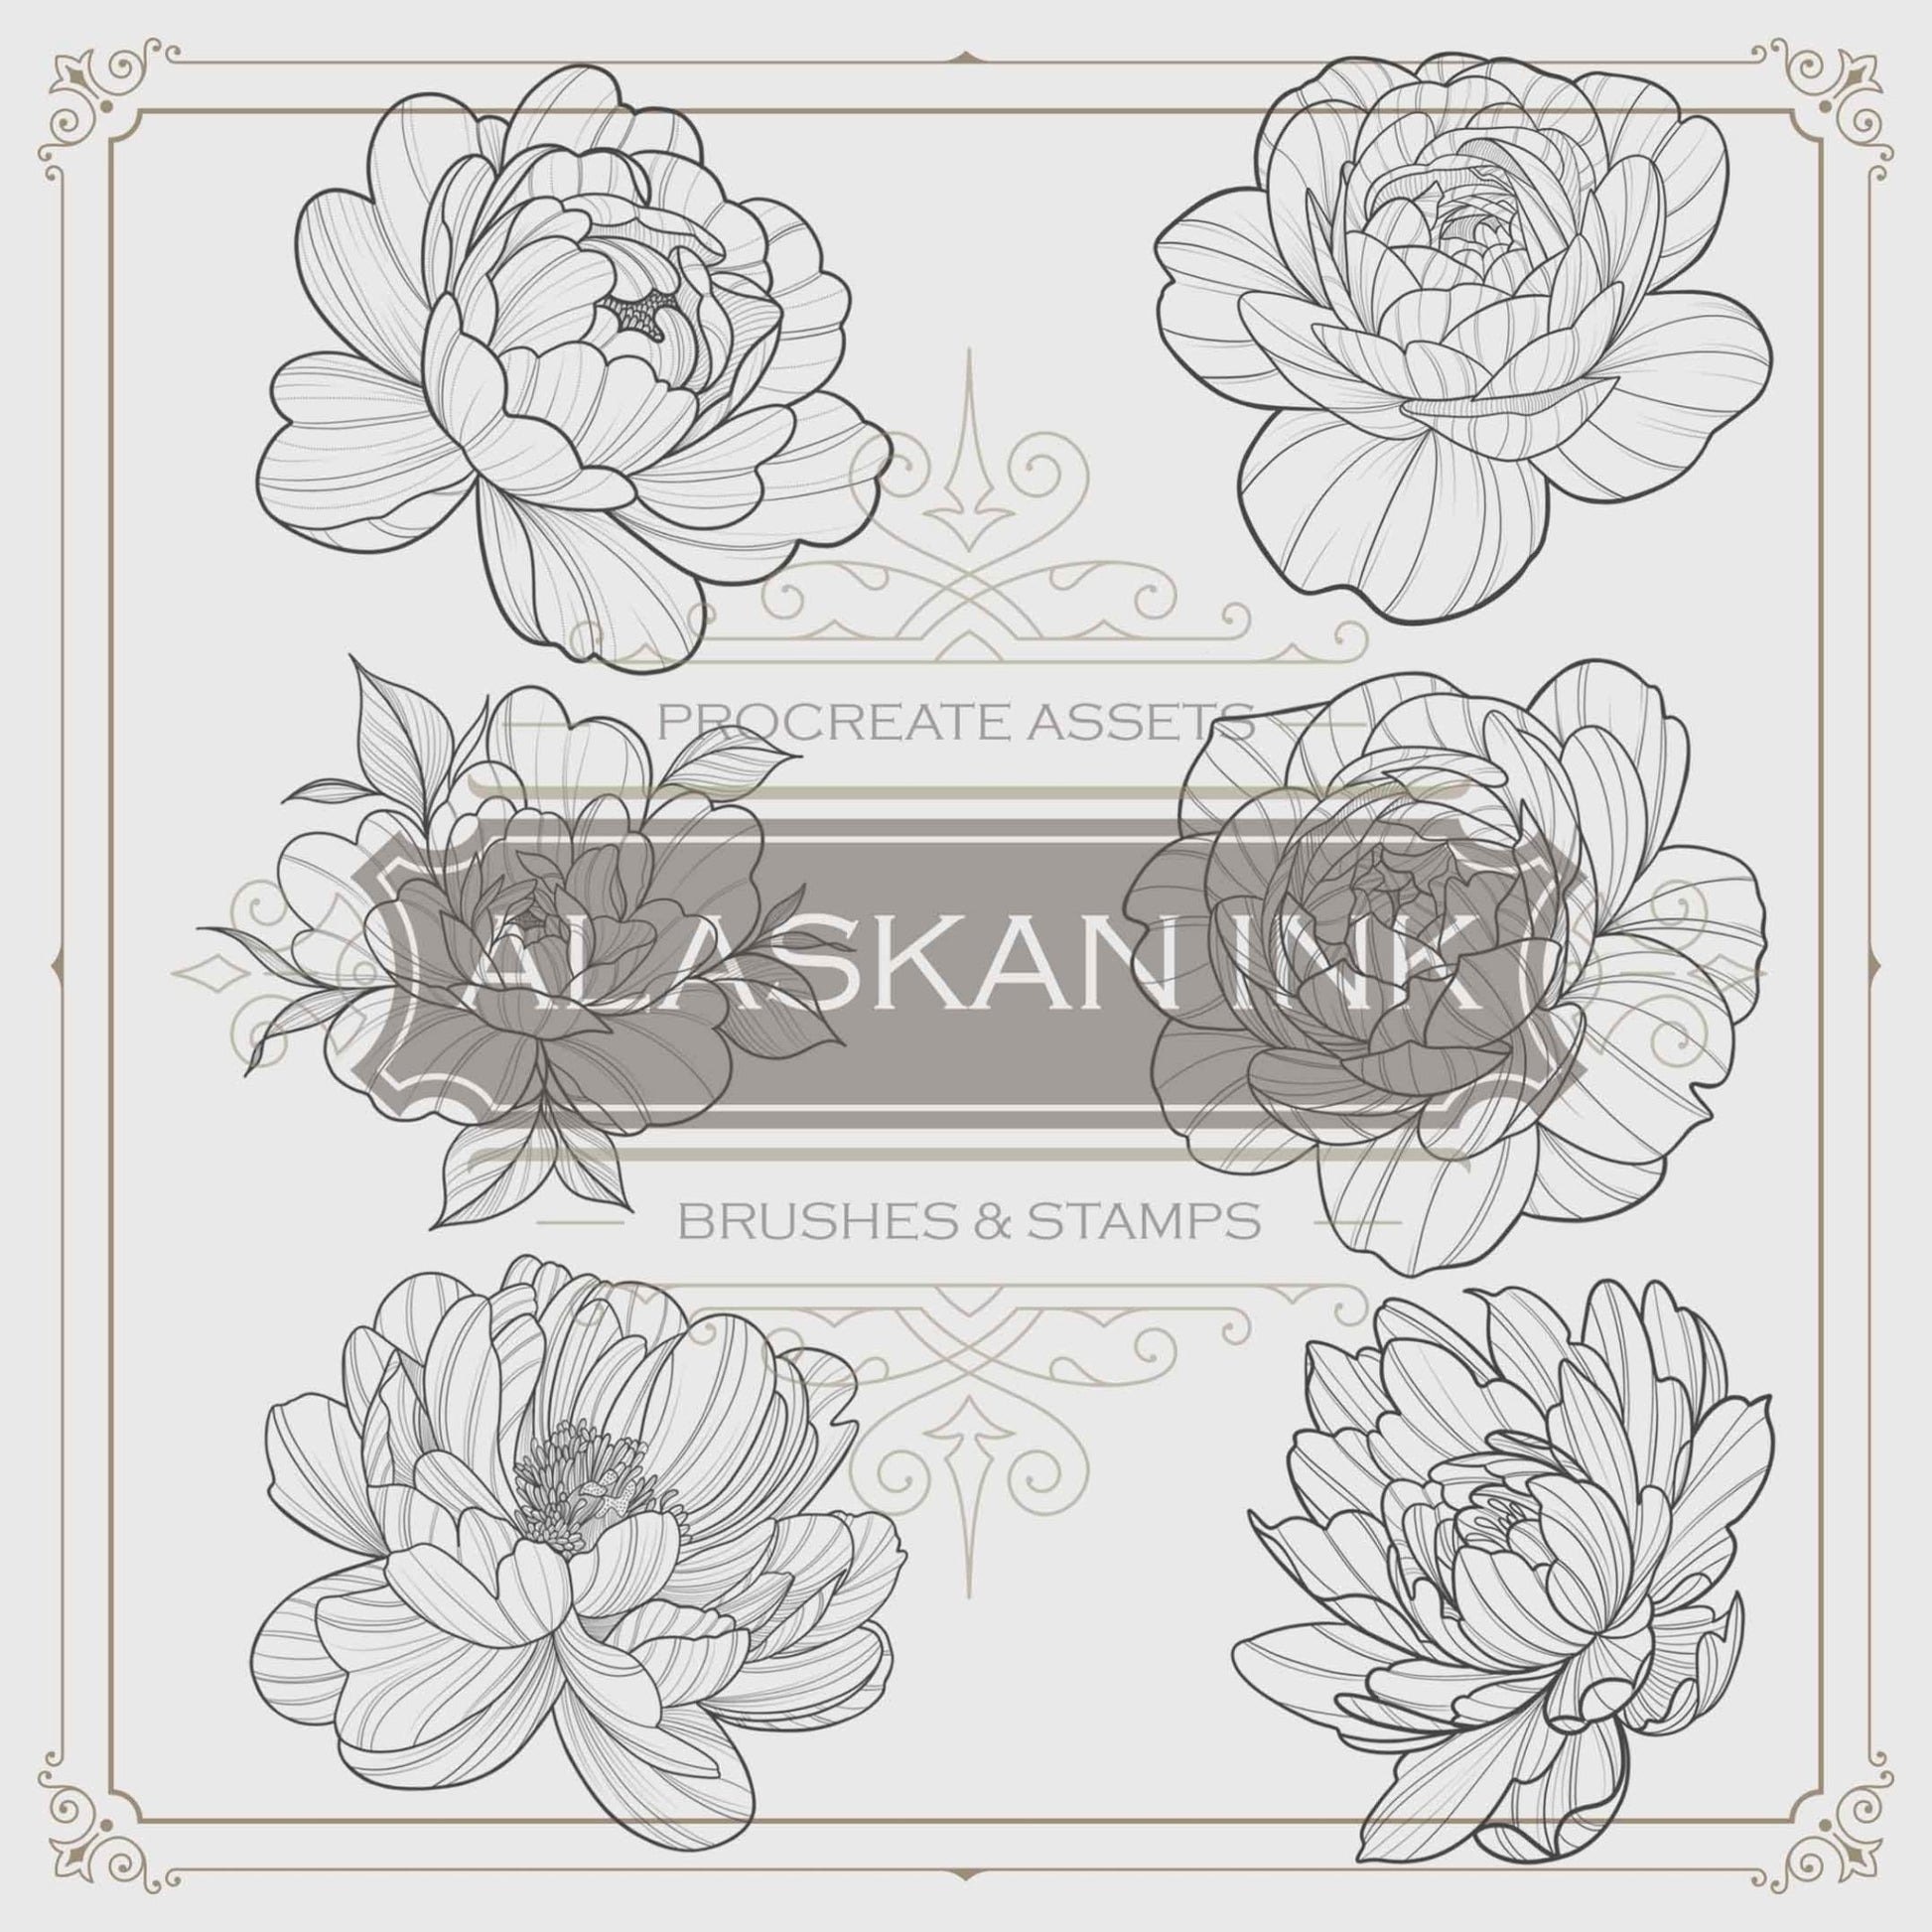 30 Peonies Tattoo Brushes for Procreate Application created by Alaskan ink